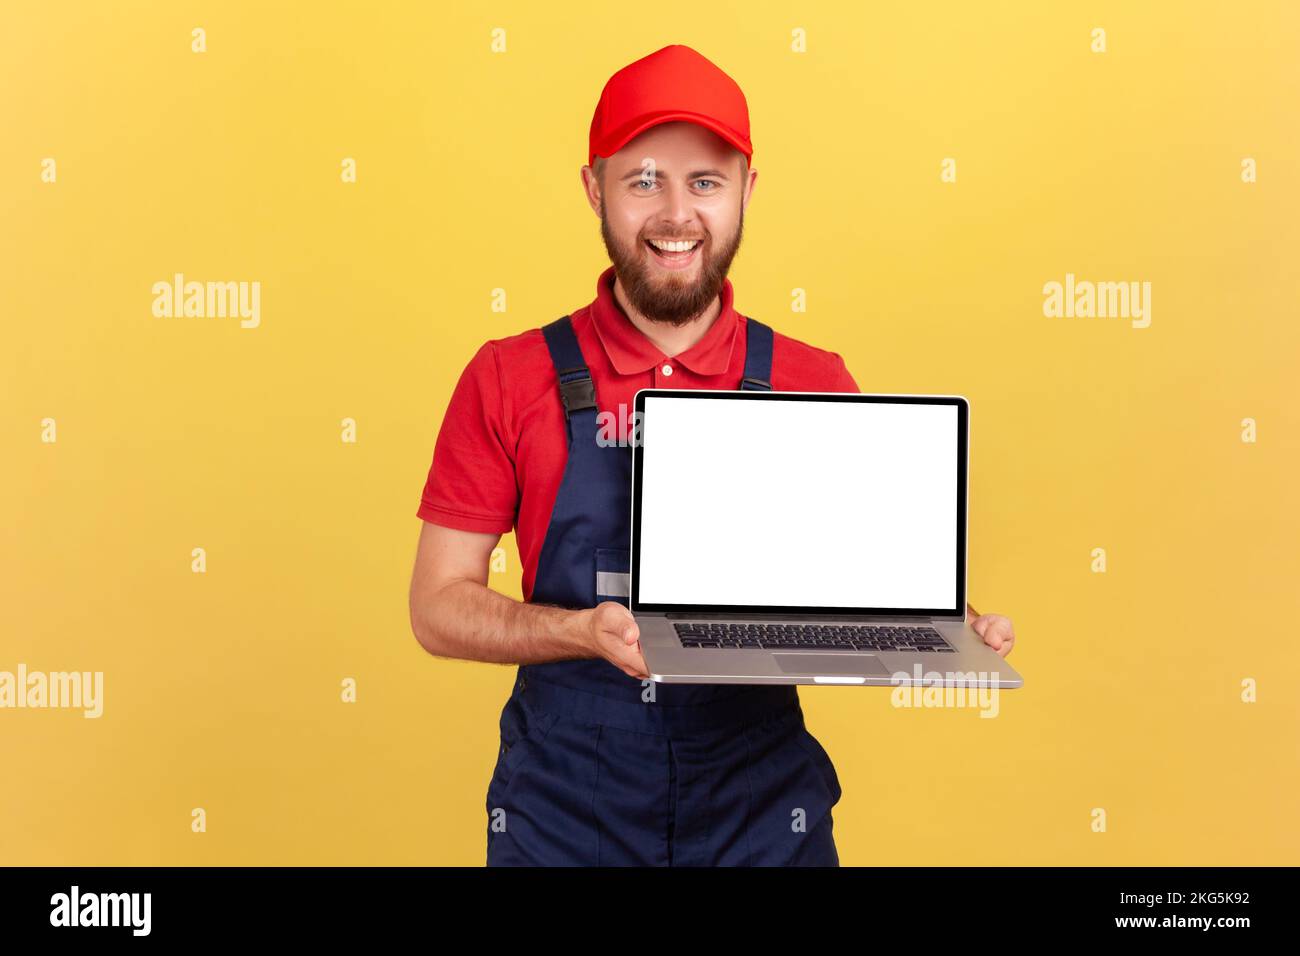 Portrait of smiling happy worker man in uniform standing and showing laptop with blank screen for advertisement, looking smiling at camera. Indoor studio shot isolated on yellow background. Stock Photo